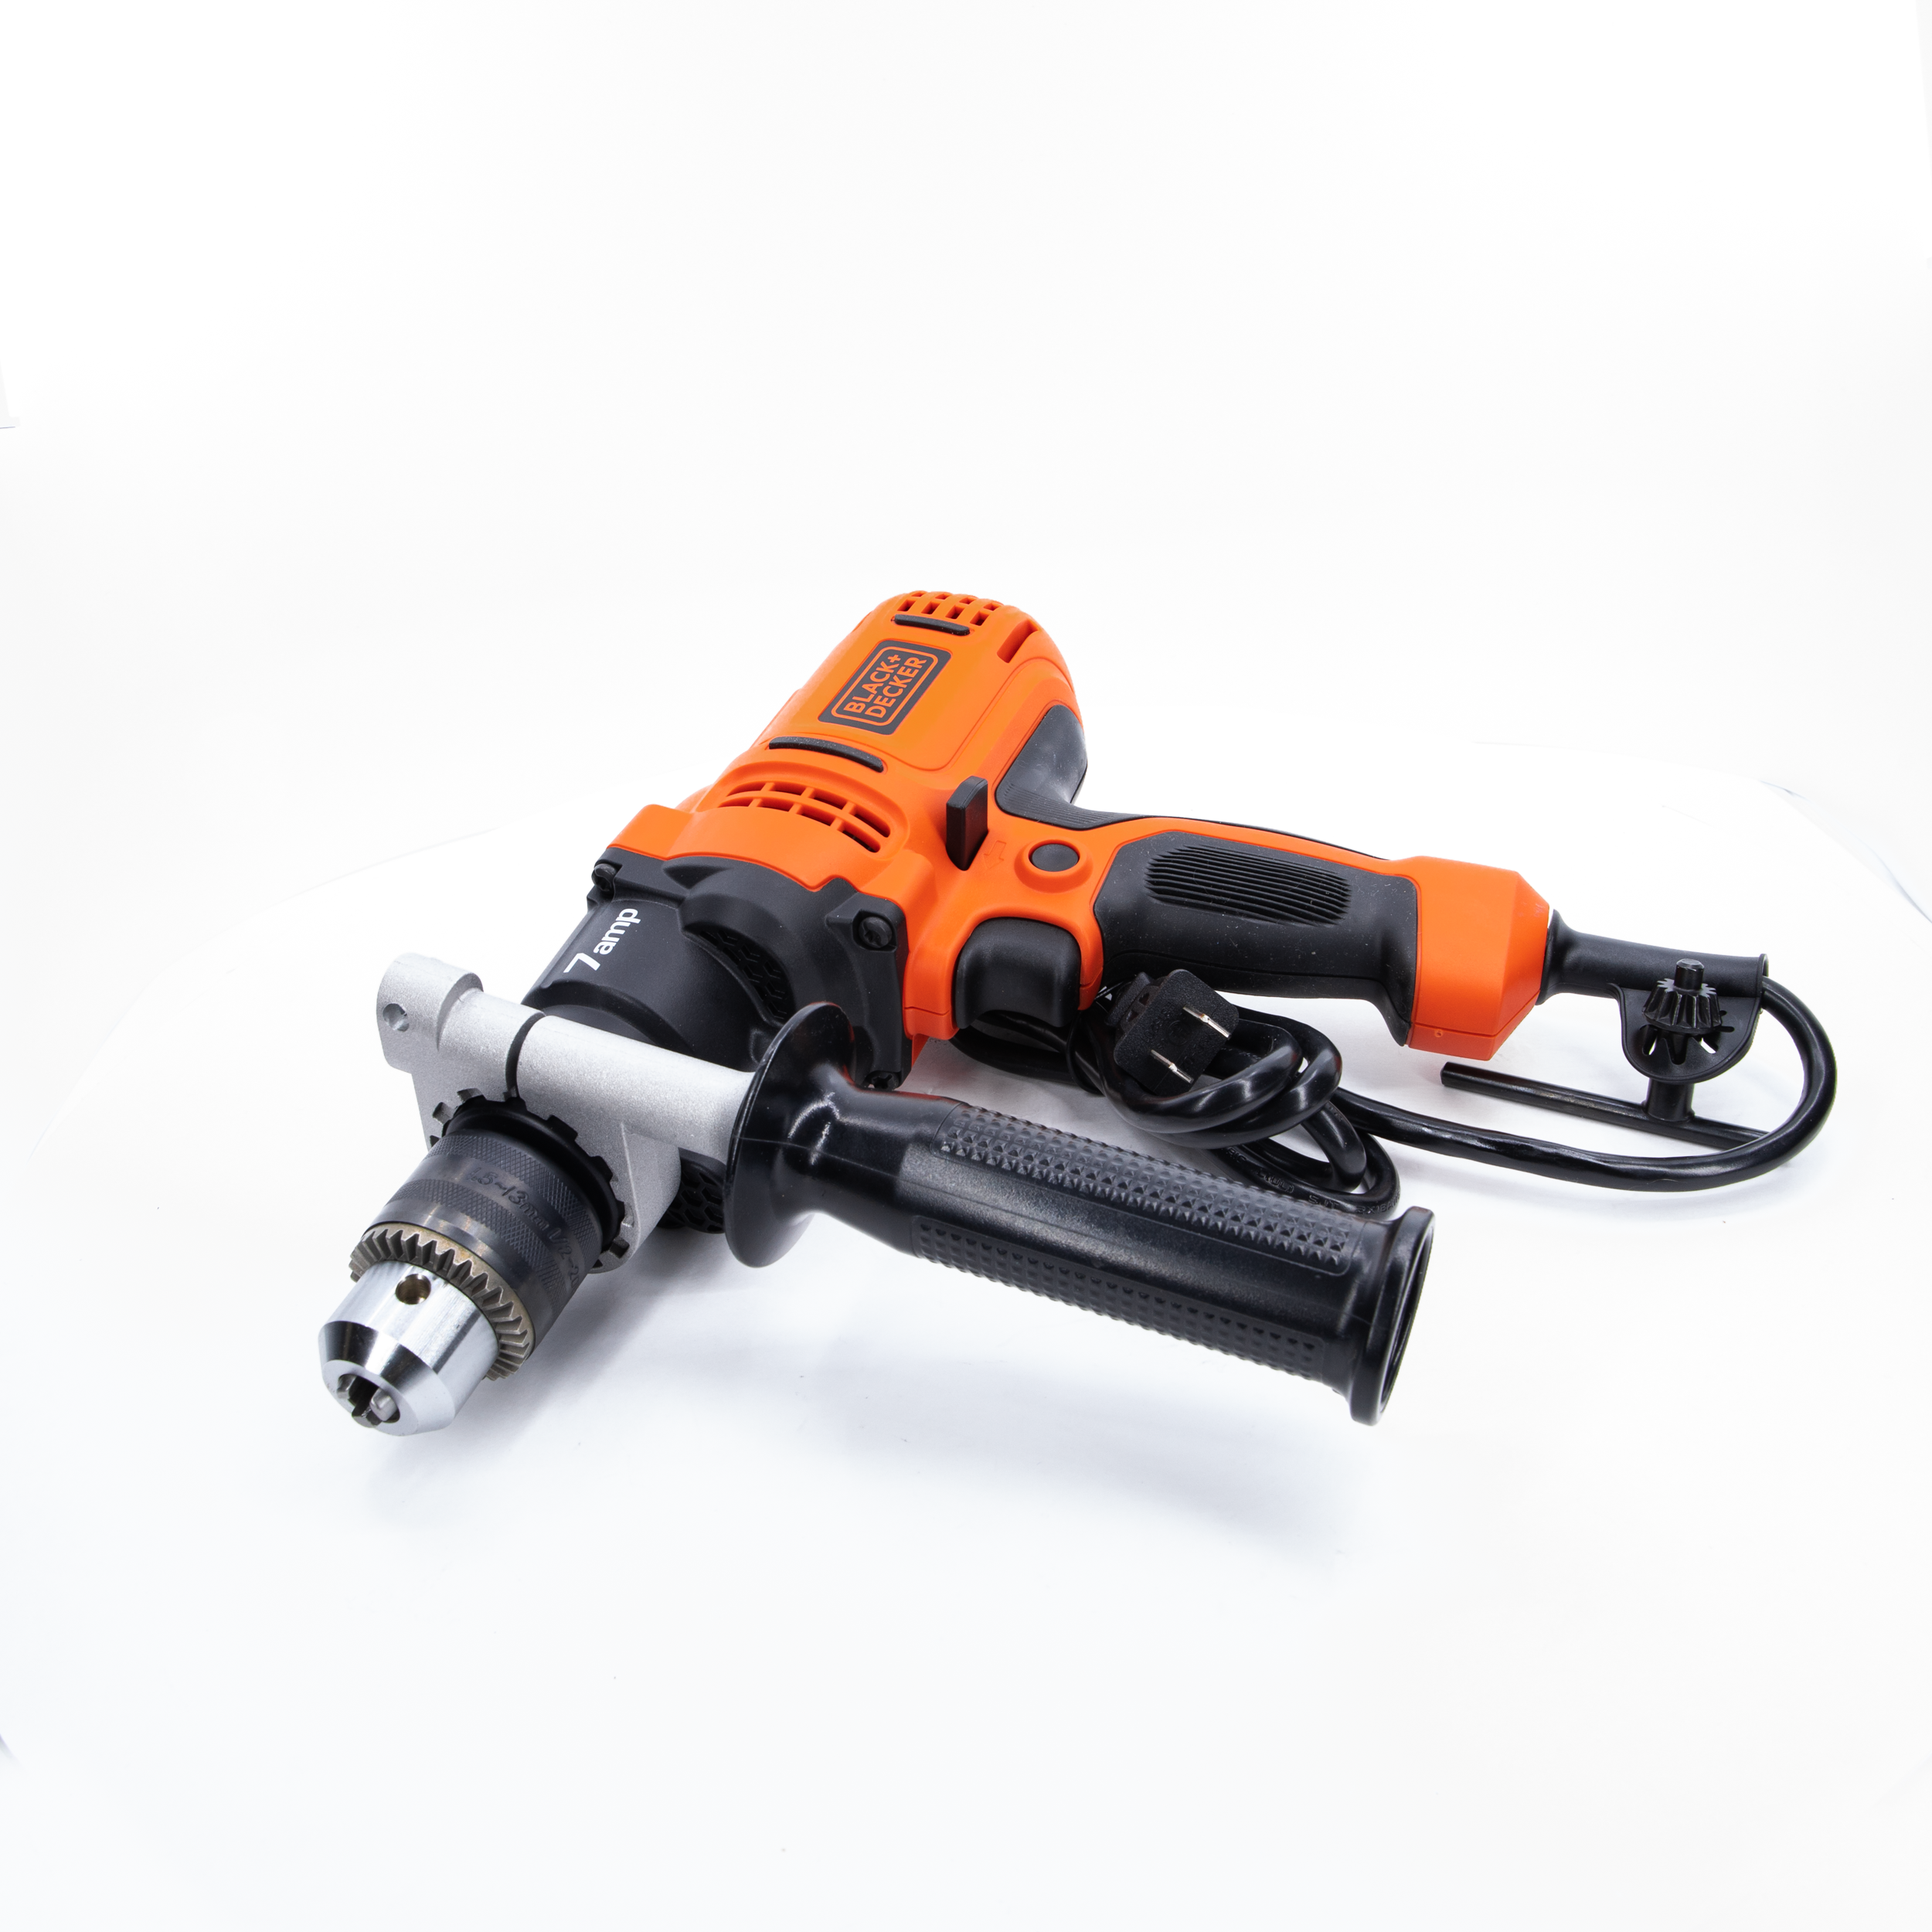 Black & Decker 1/2 Hammer Drill DR601 Corded Electric 6 Amp with Carrying  Case